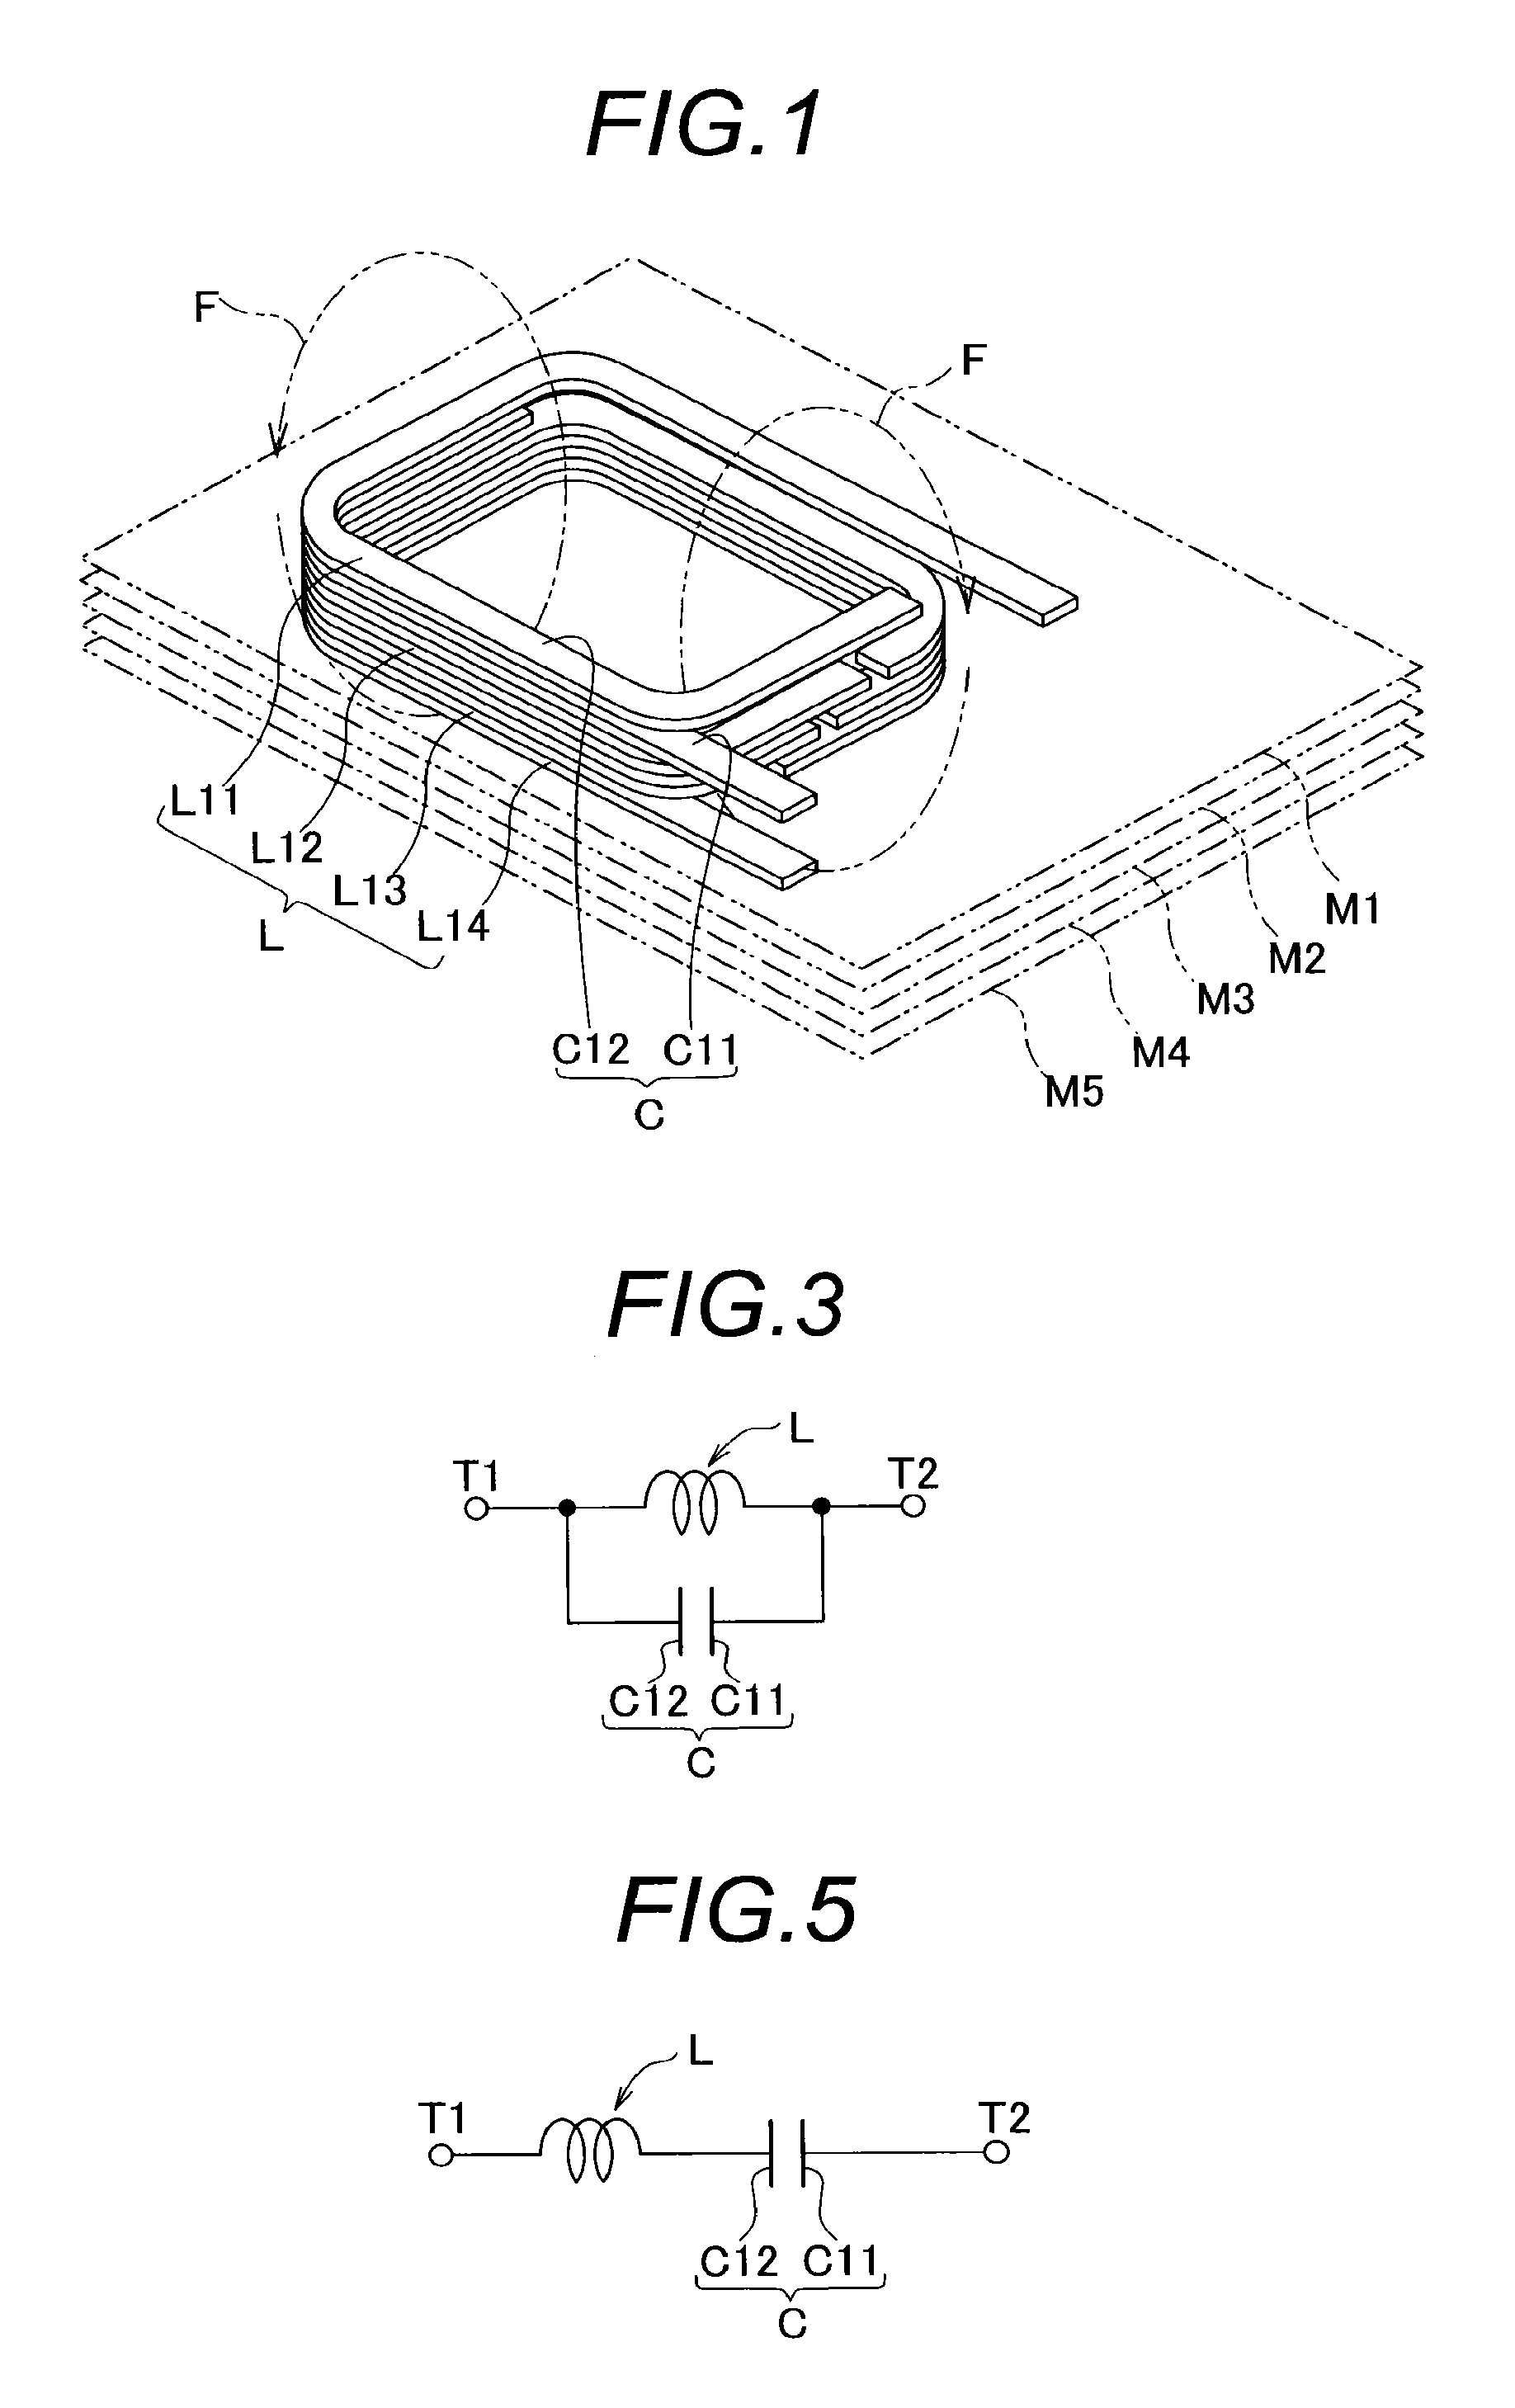 Laminated composite electronic device including coil and capacitor